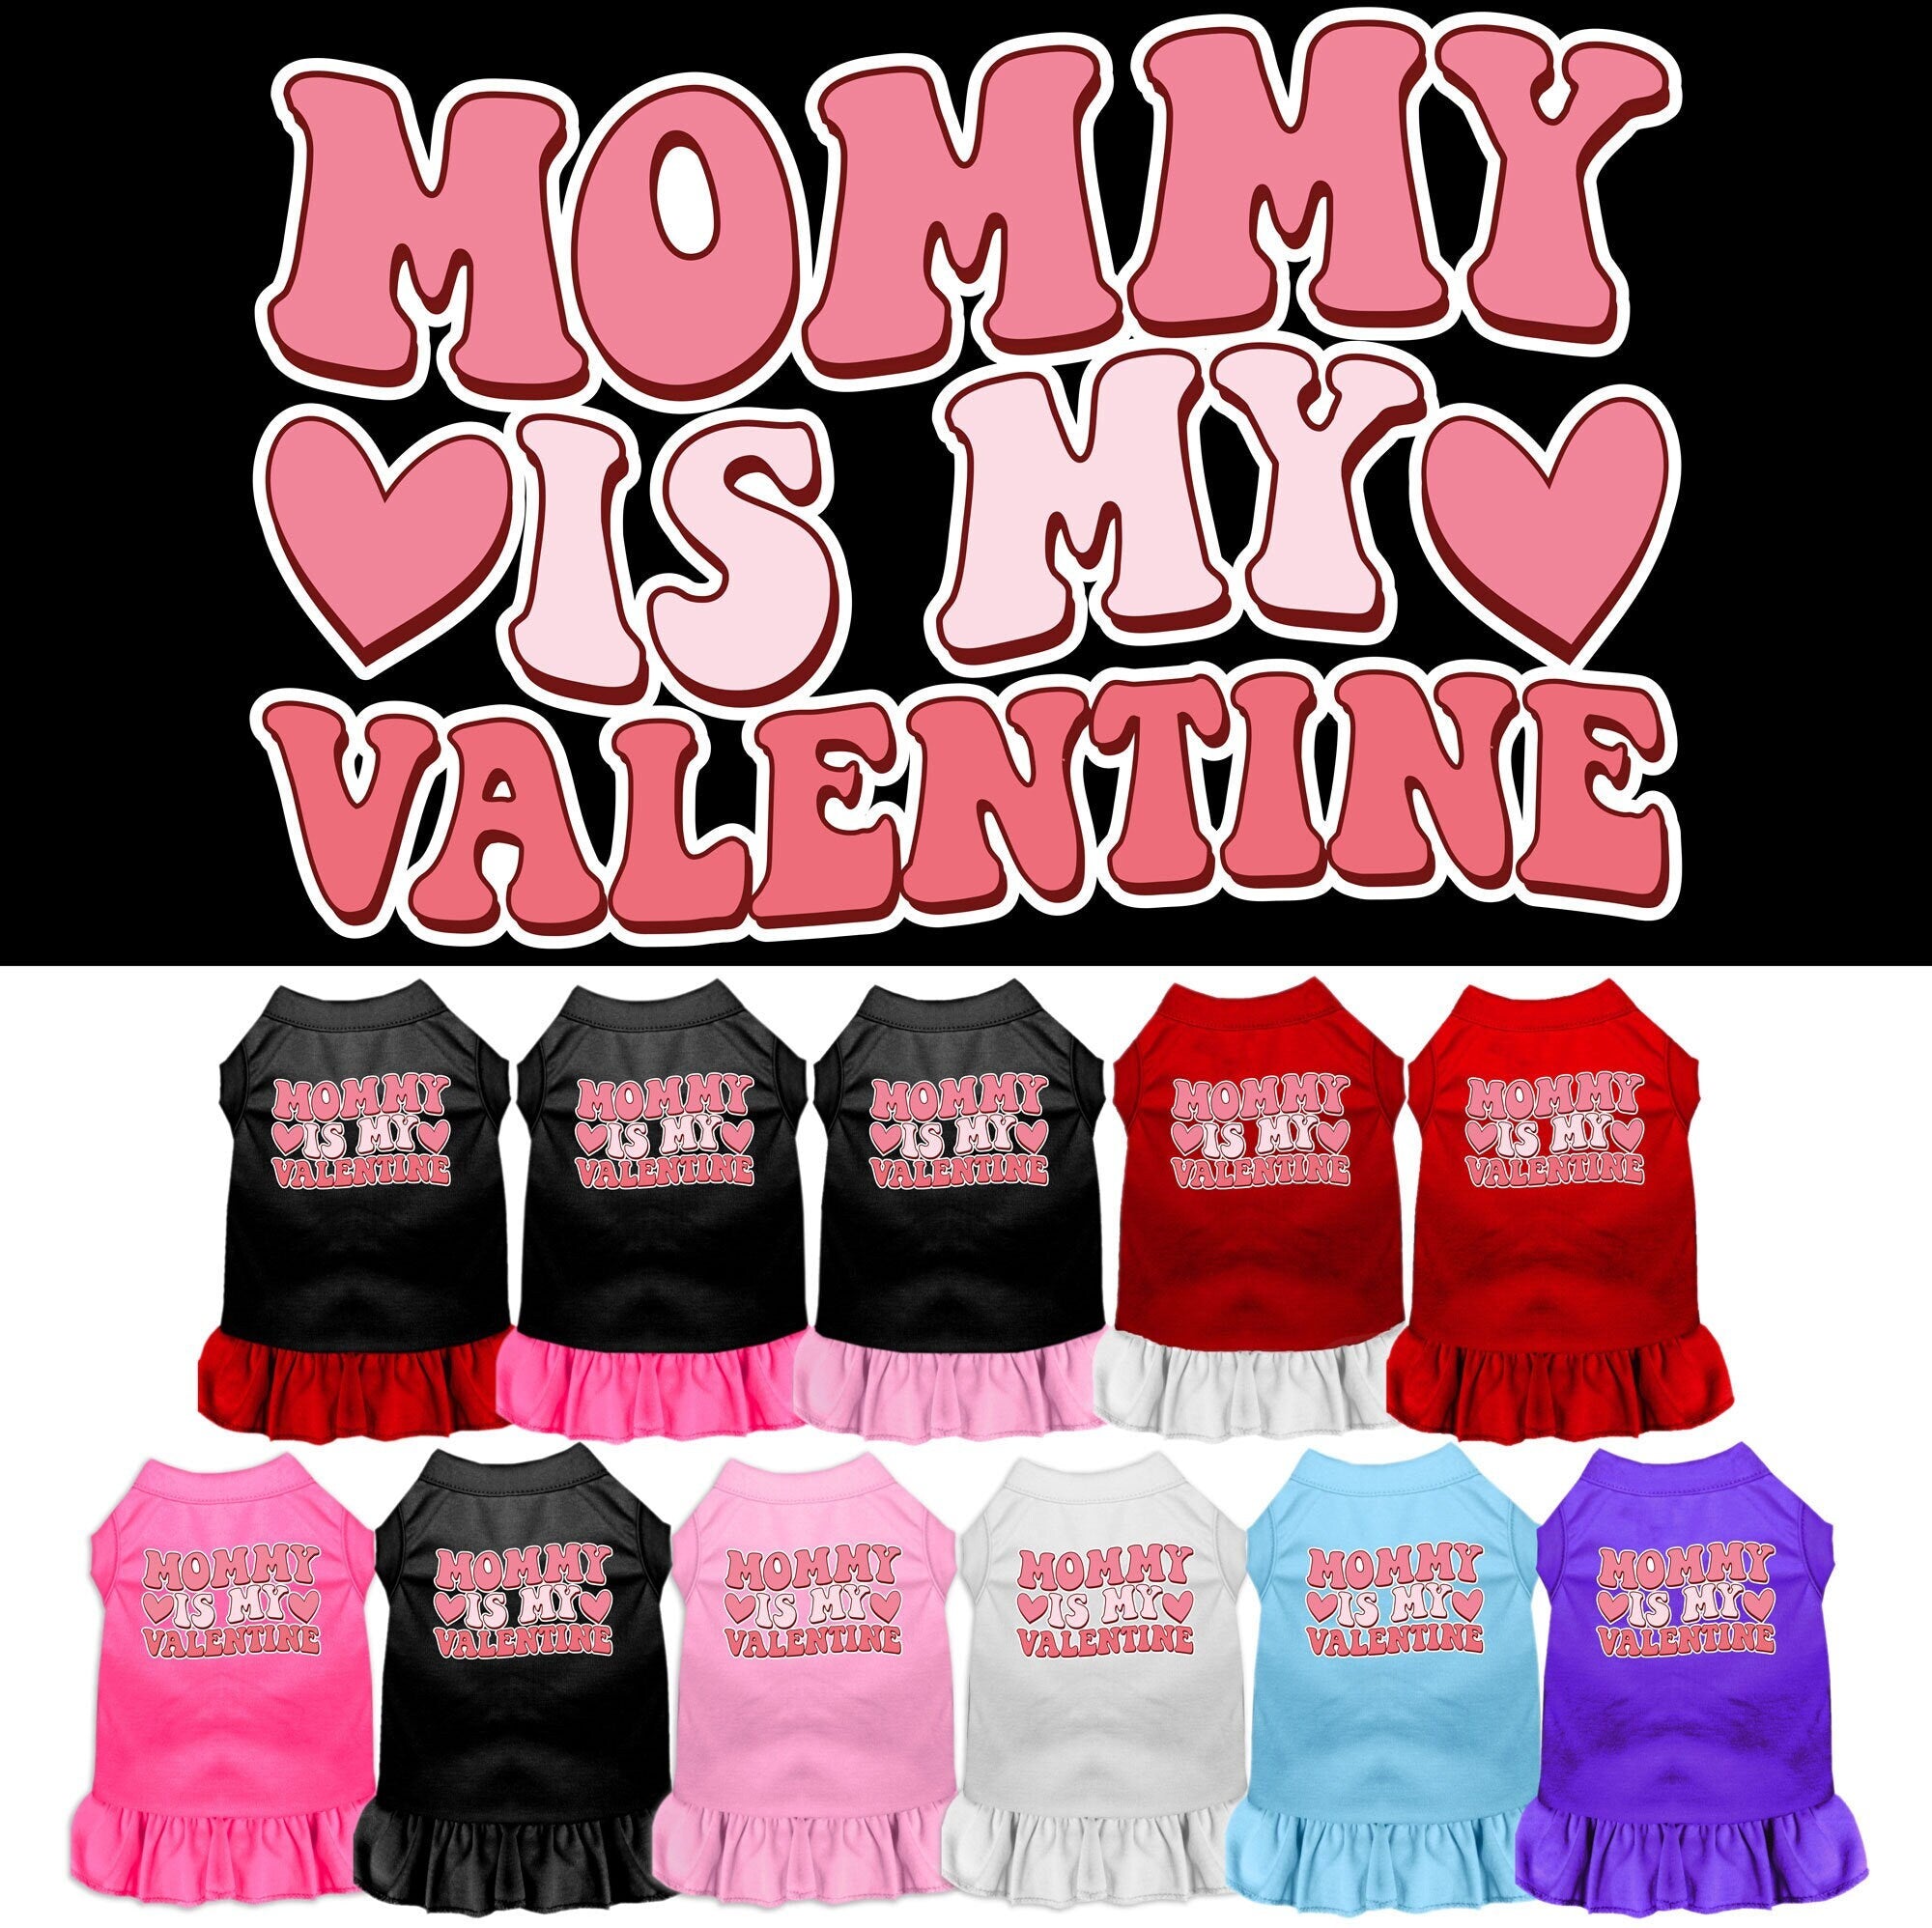 Pet Dog & Cat Screen Printed Dress for Medium to Large Pets (Sizes 2XL-4XL), "Mommy Is My Valentine"